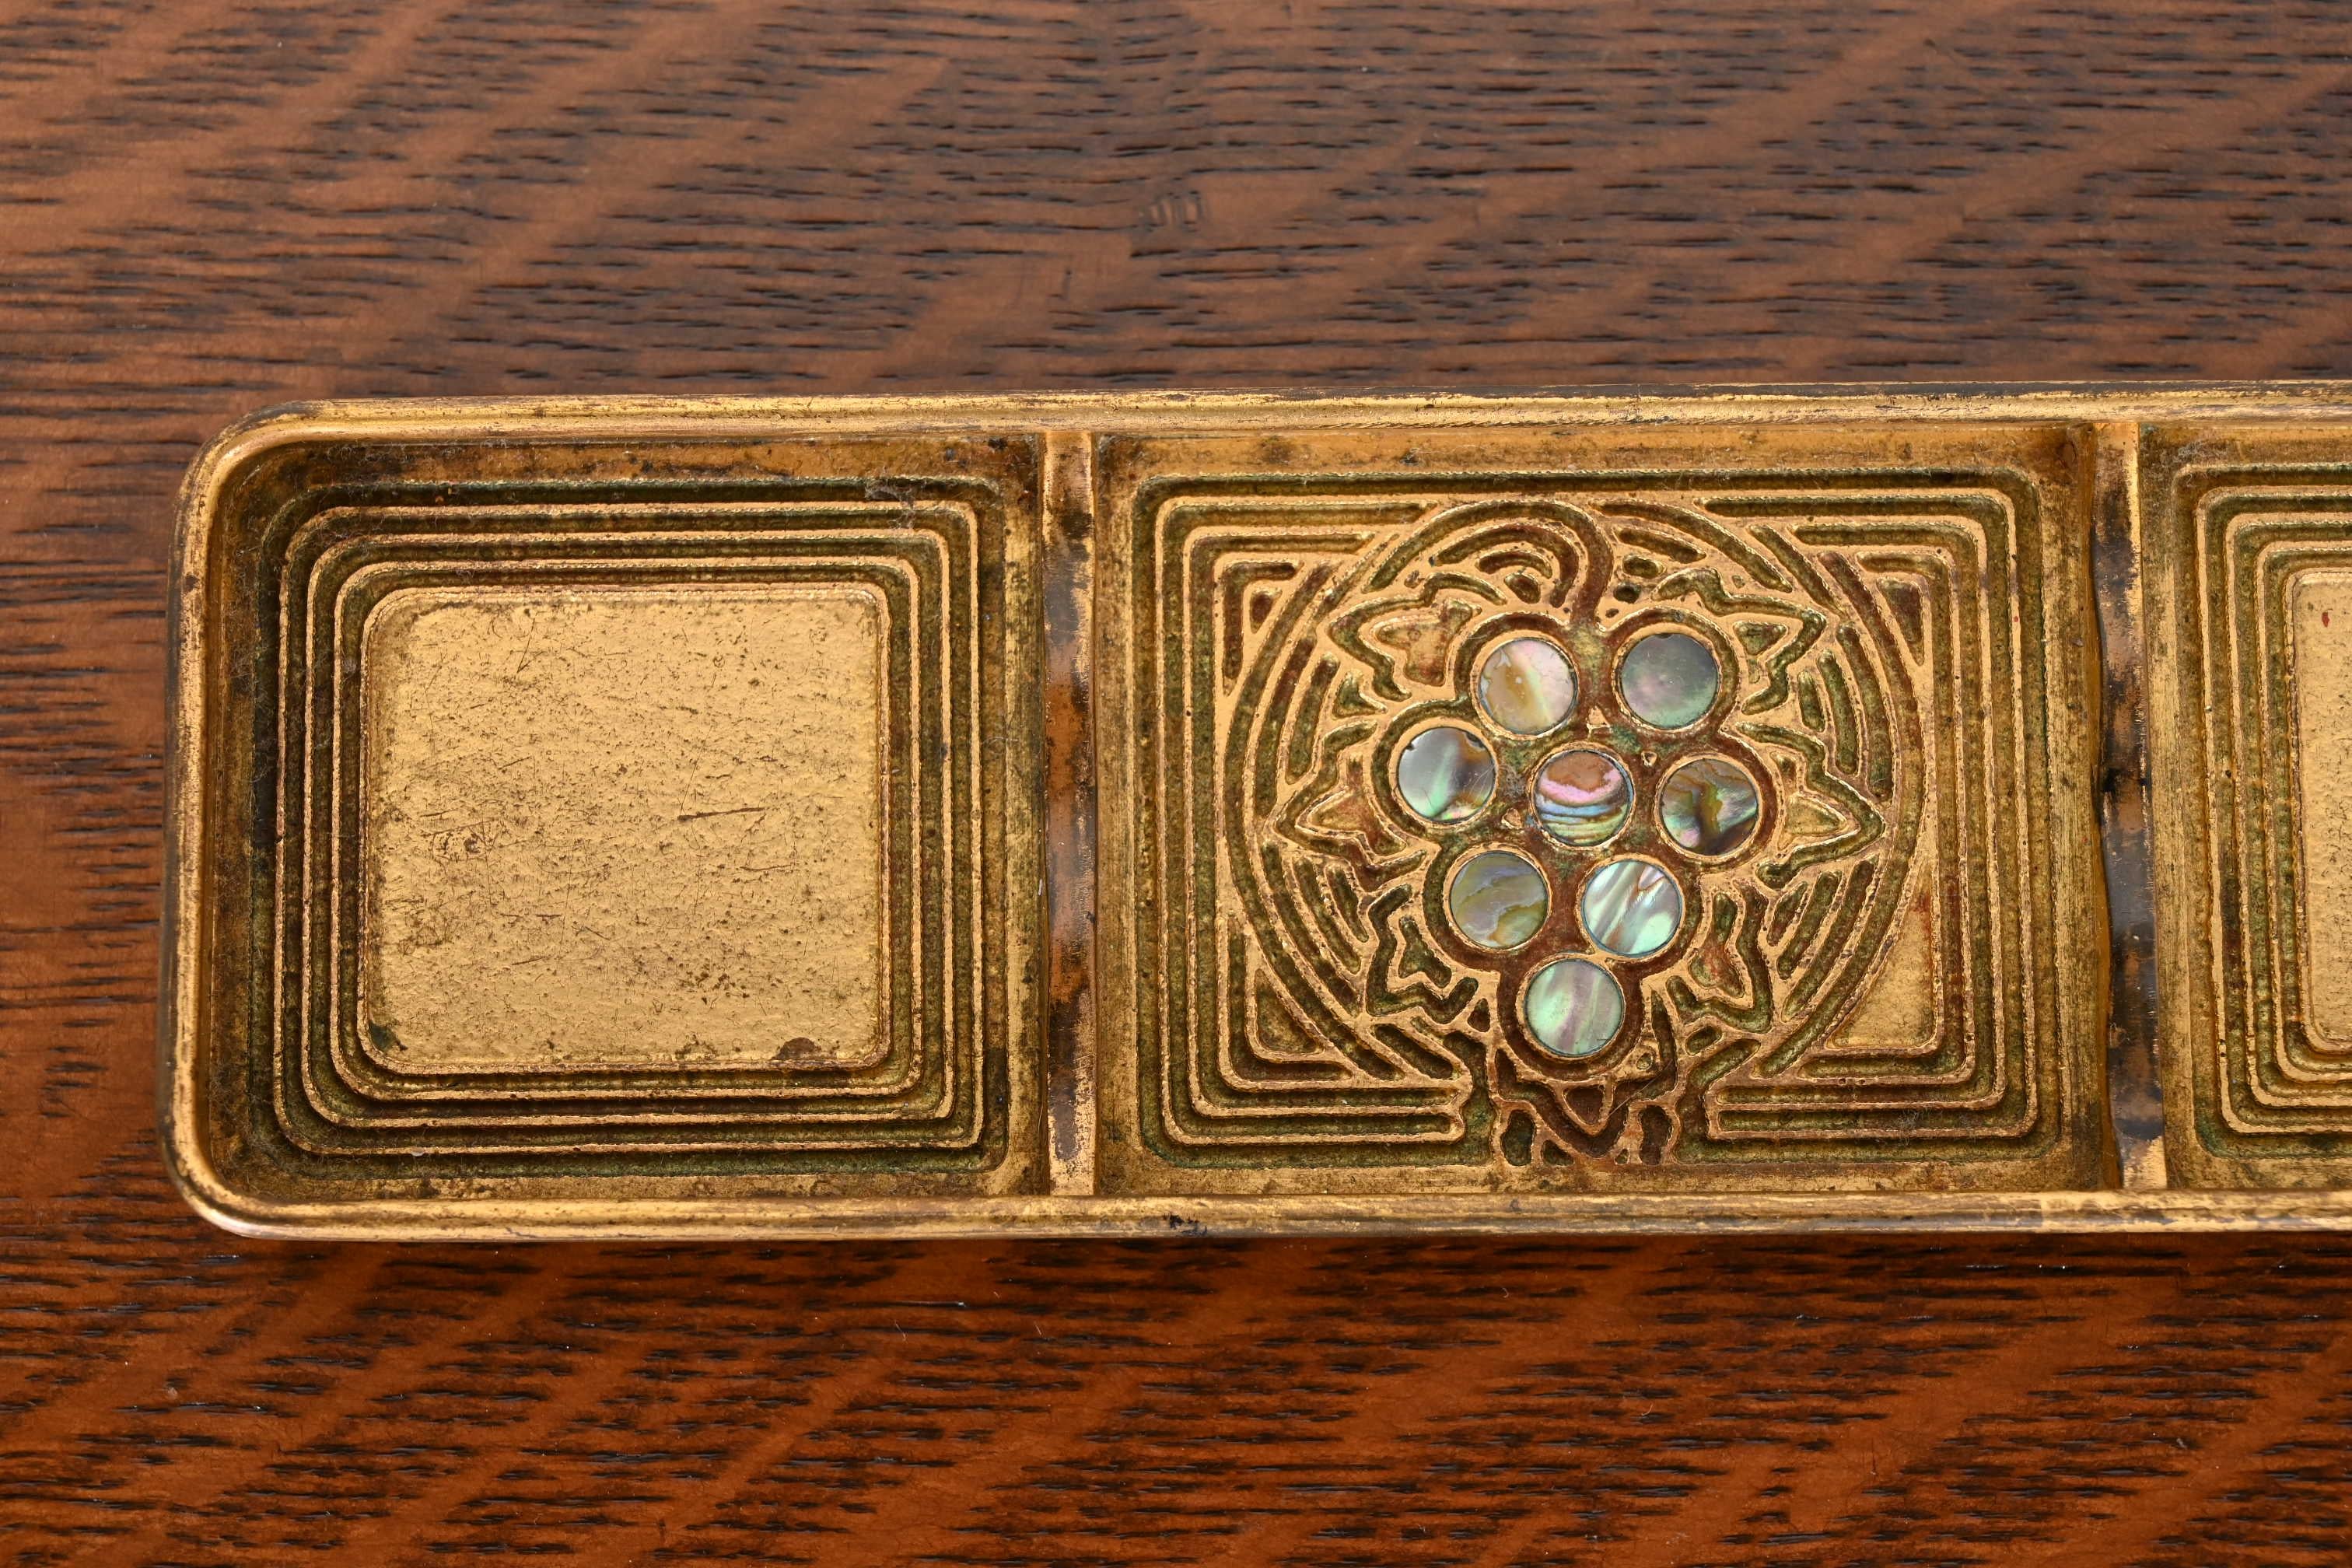 Tiffany Studios New York Bronze Doré and Abalone Pen Tray For Sale 2